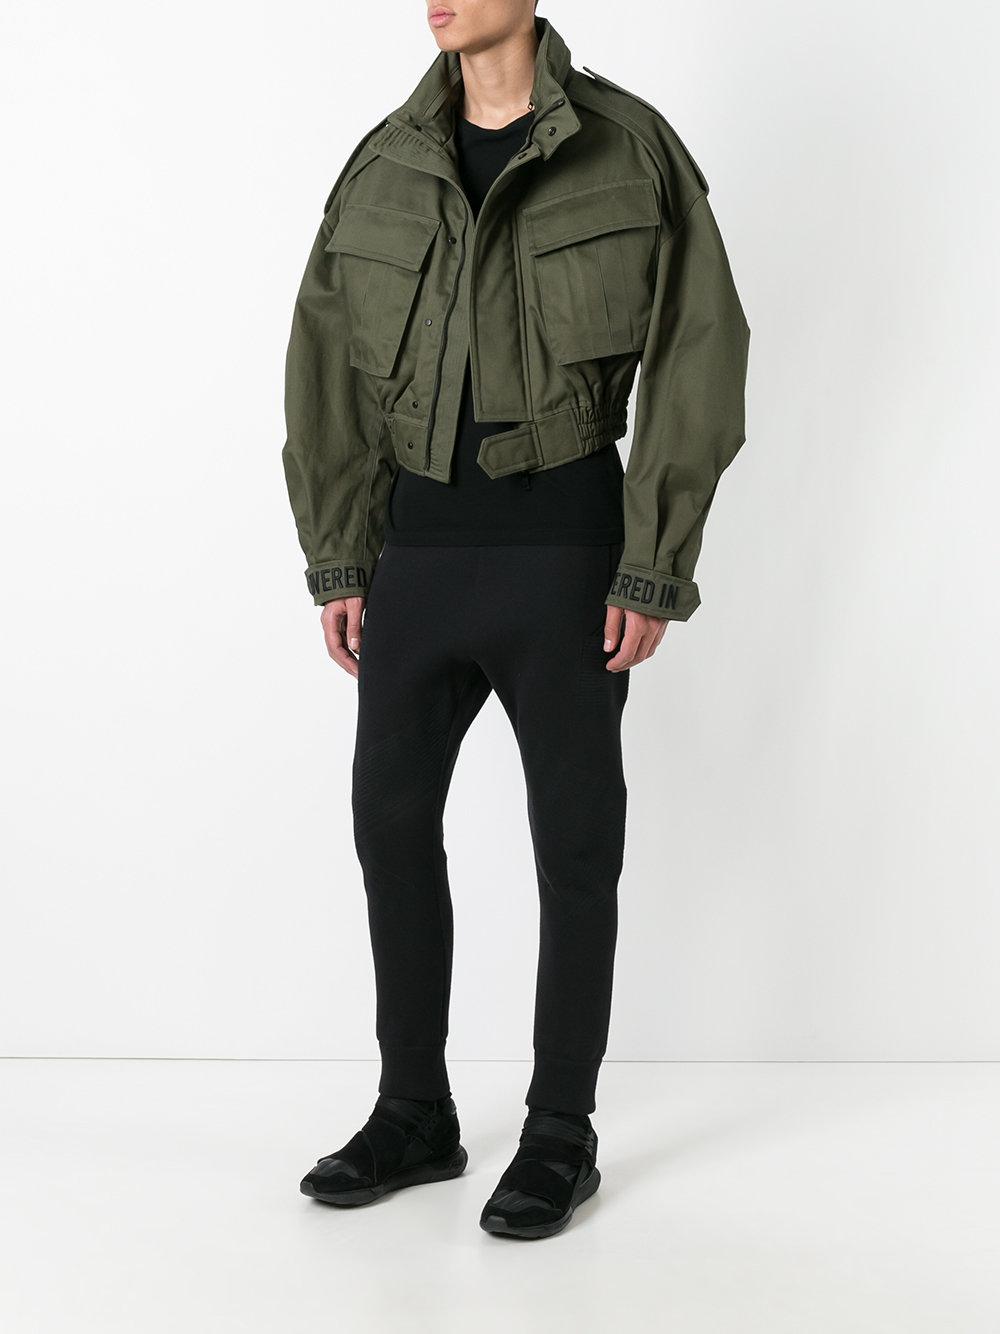 Juun.J Cotton Cropped Military Jacket in Green for Men - Lyst